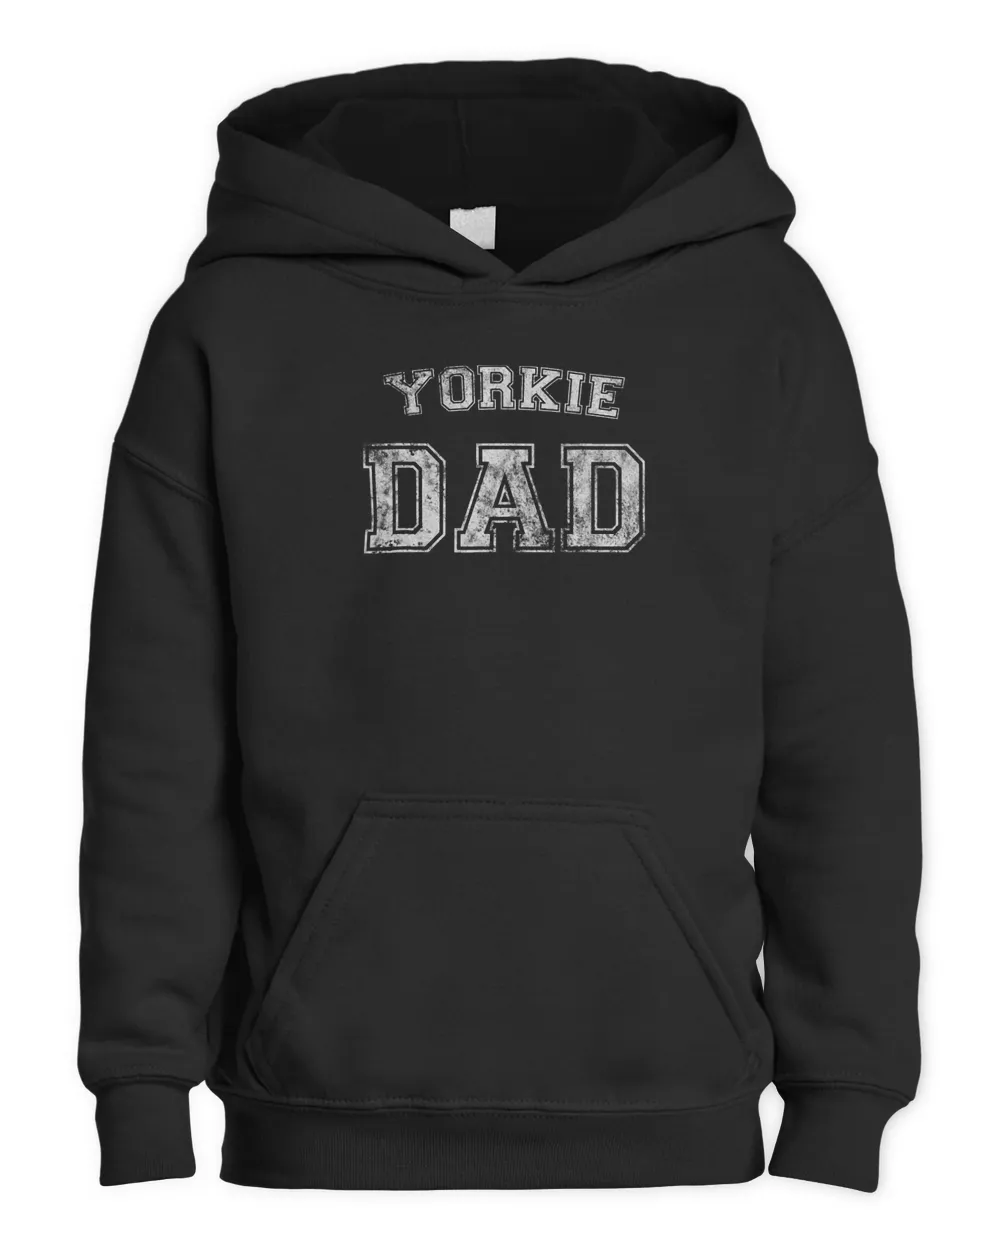 Yorkie Dad T-Shirt Yorkshire Terrier Dog Breed Tee